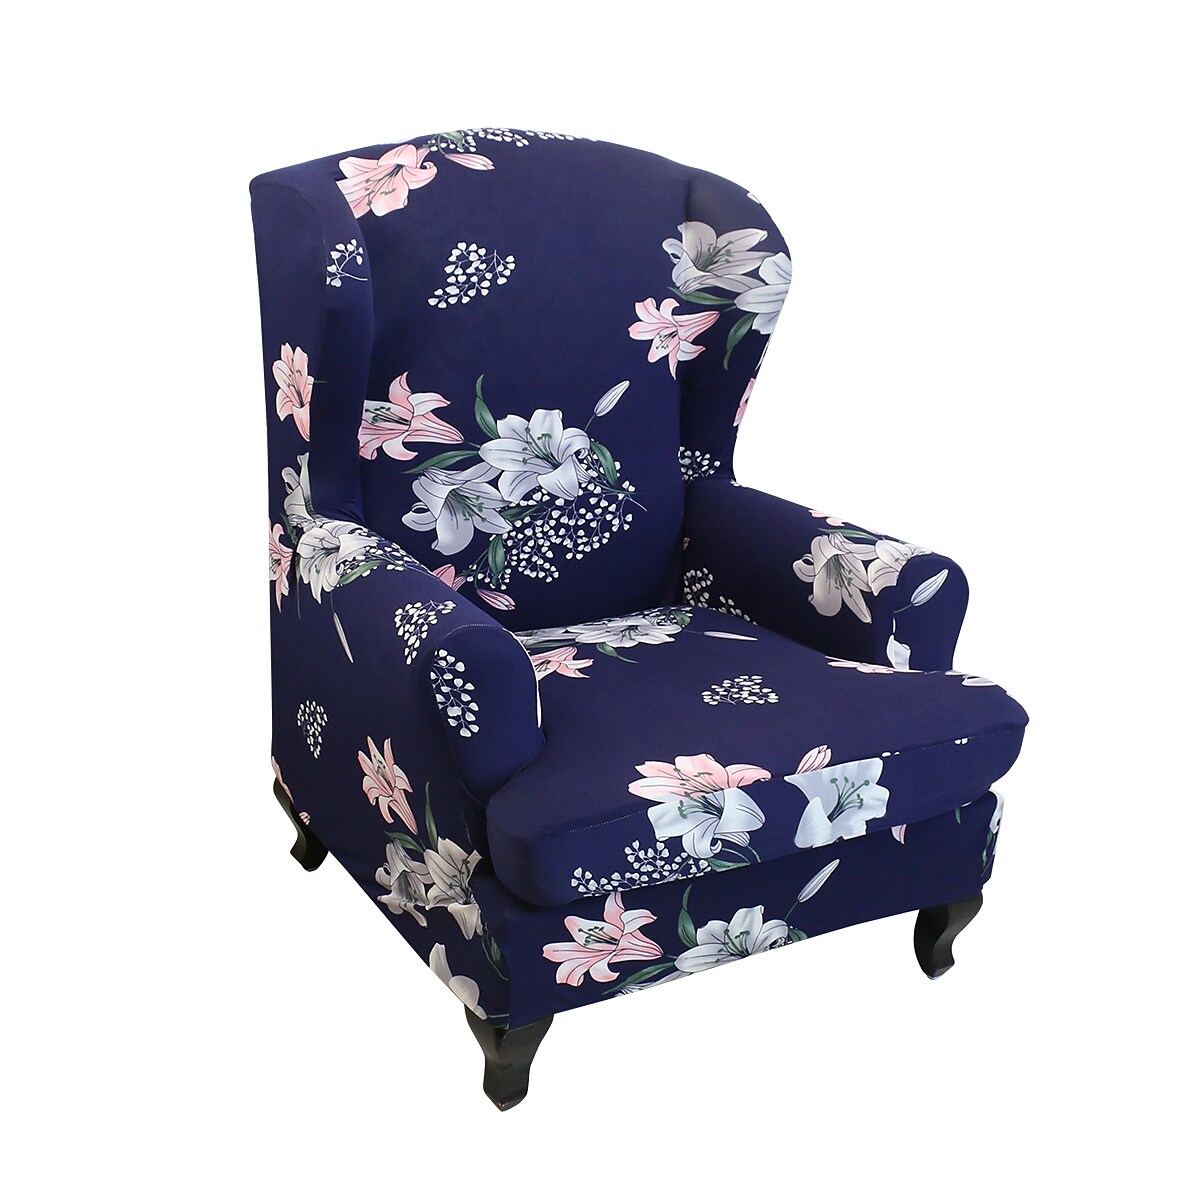 1 Set of 2 Pieces Floral Printed Stretch Wingback Chair Cover